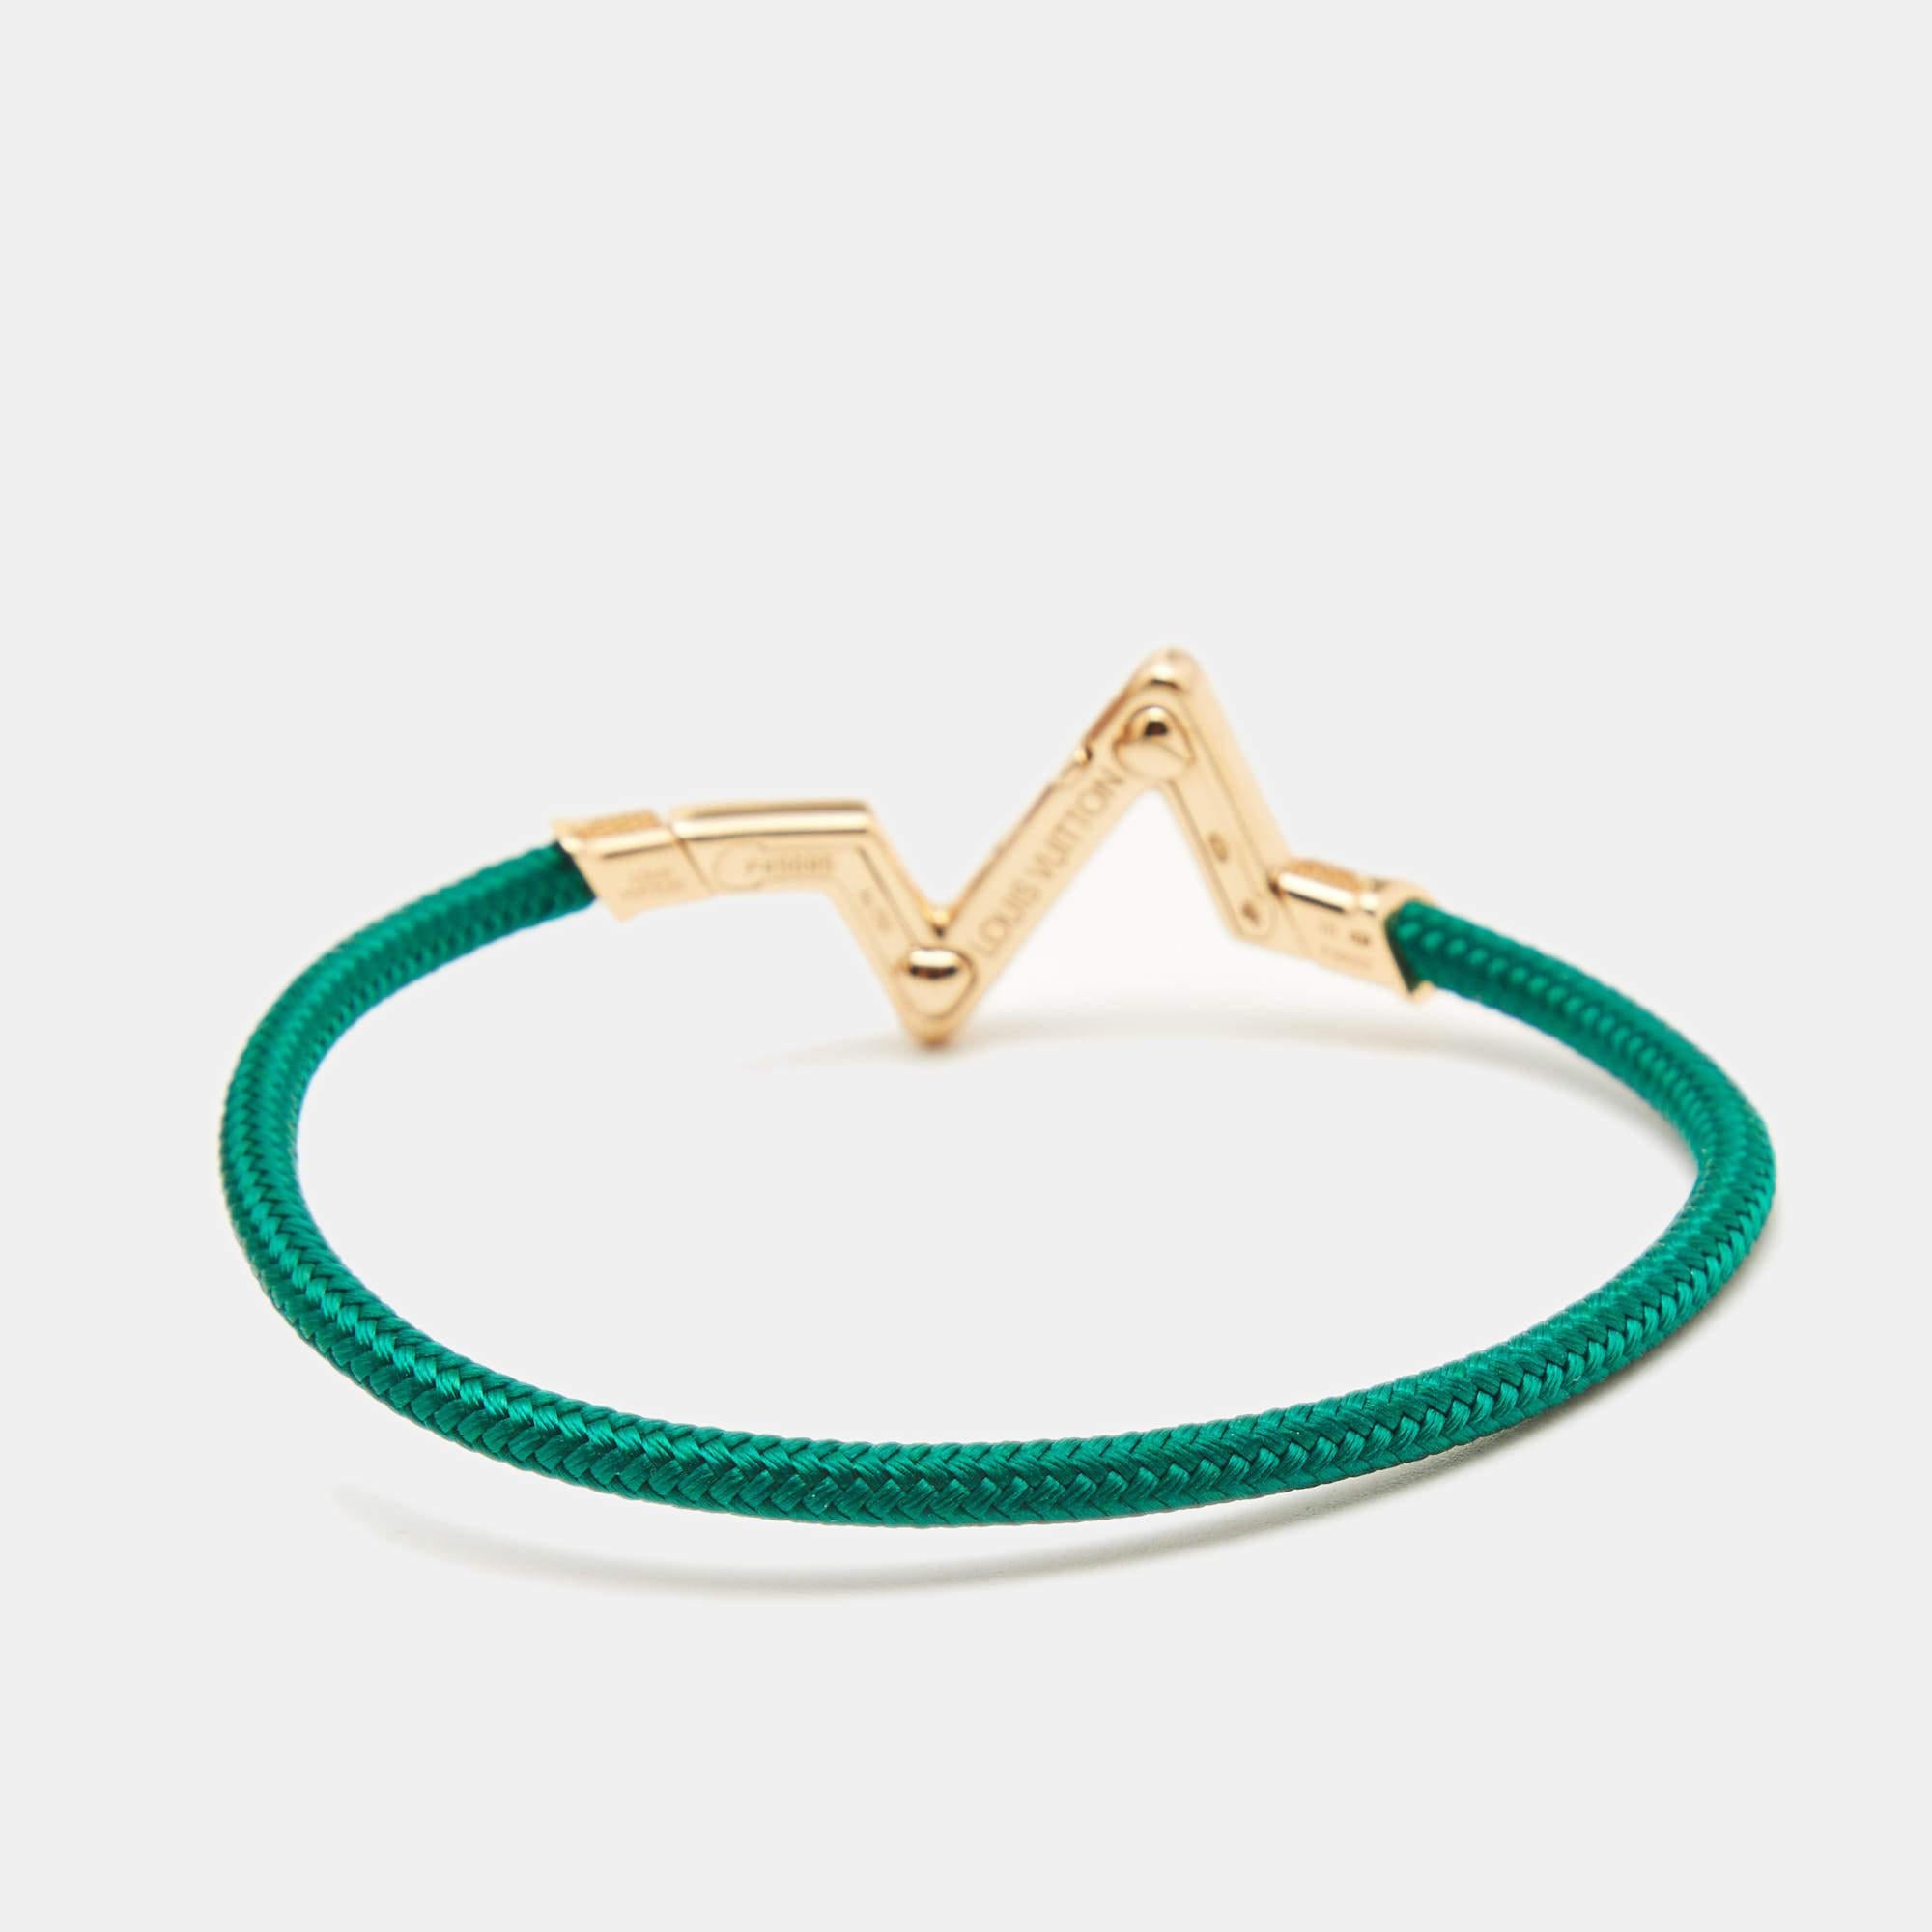 Ultra-modern and chic in design, this Louis Vuitton bracelet exhibits contemporary fashion. The luxe design is set with distinct elements to give the creation a classy touch. This sweet piece will look great when paired with other bracelets and even